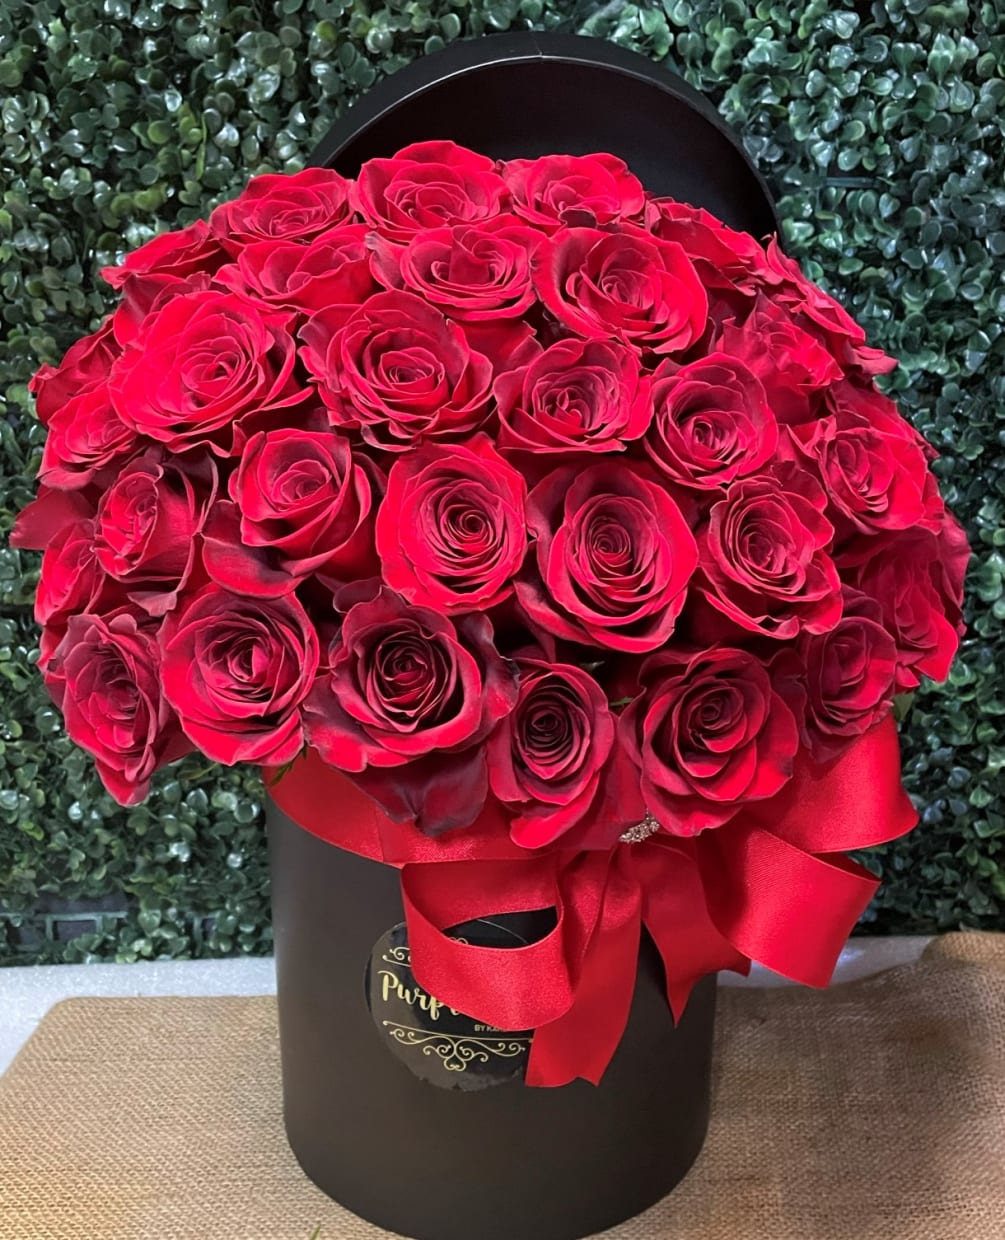 Red roses arranged in a cylinder box adorned with a red satin